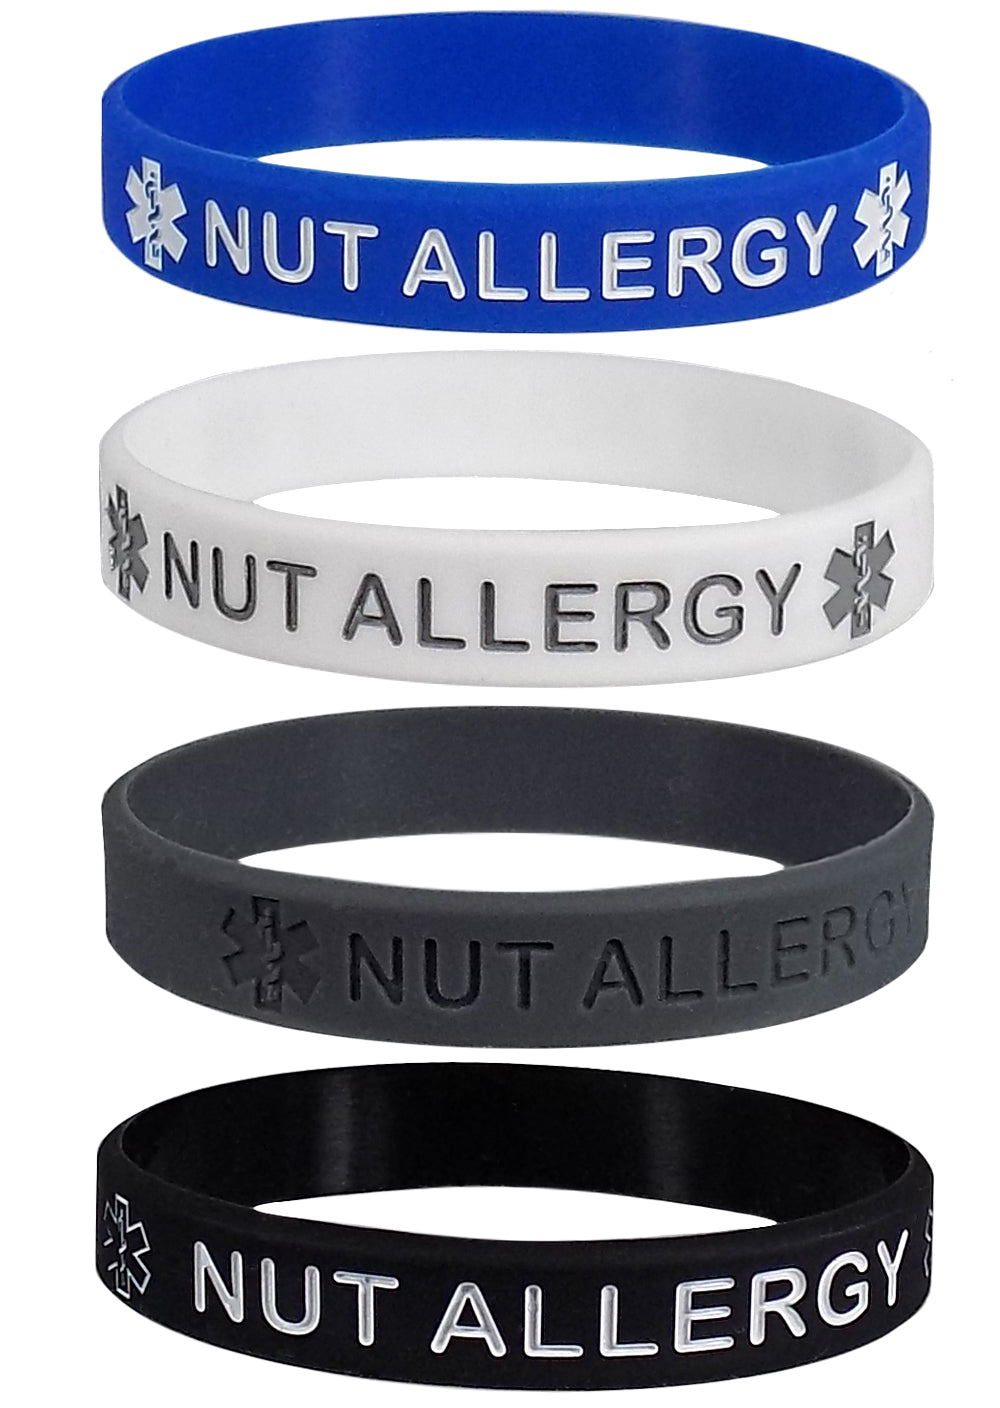 "NUT ALLERGY" Silicone Wristbands - Blue, Grey, White and Black Adult Size (4 Pack)